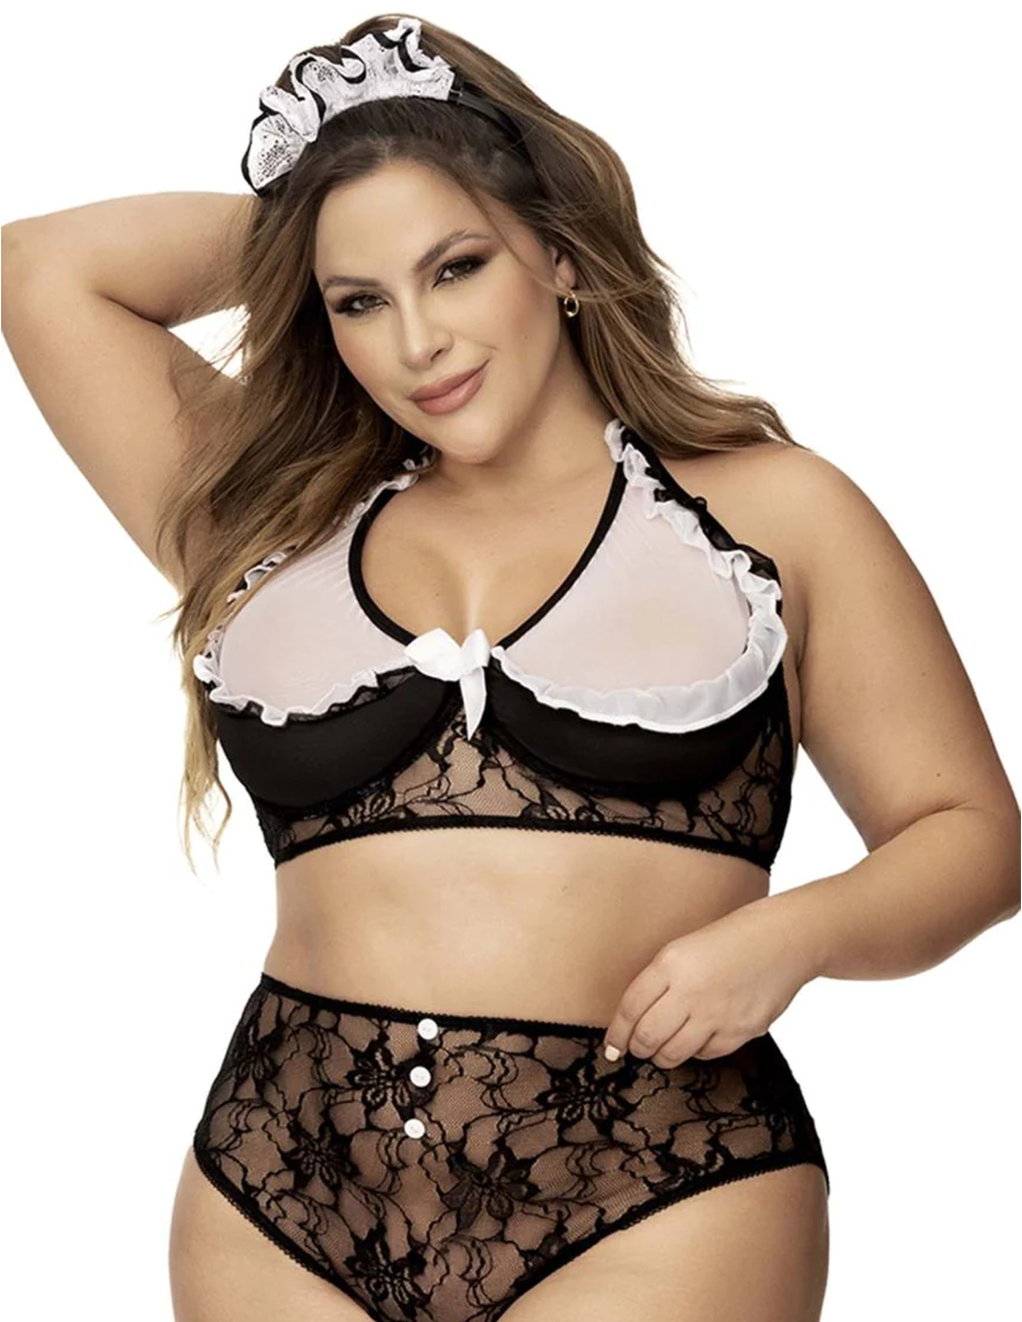 French Maid Ruffle Halter Bra & HW Lace Cut Out Panty